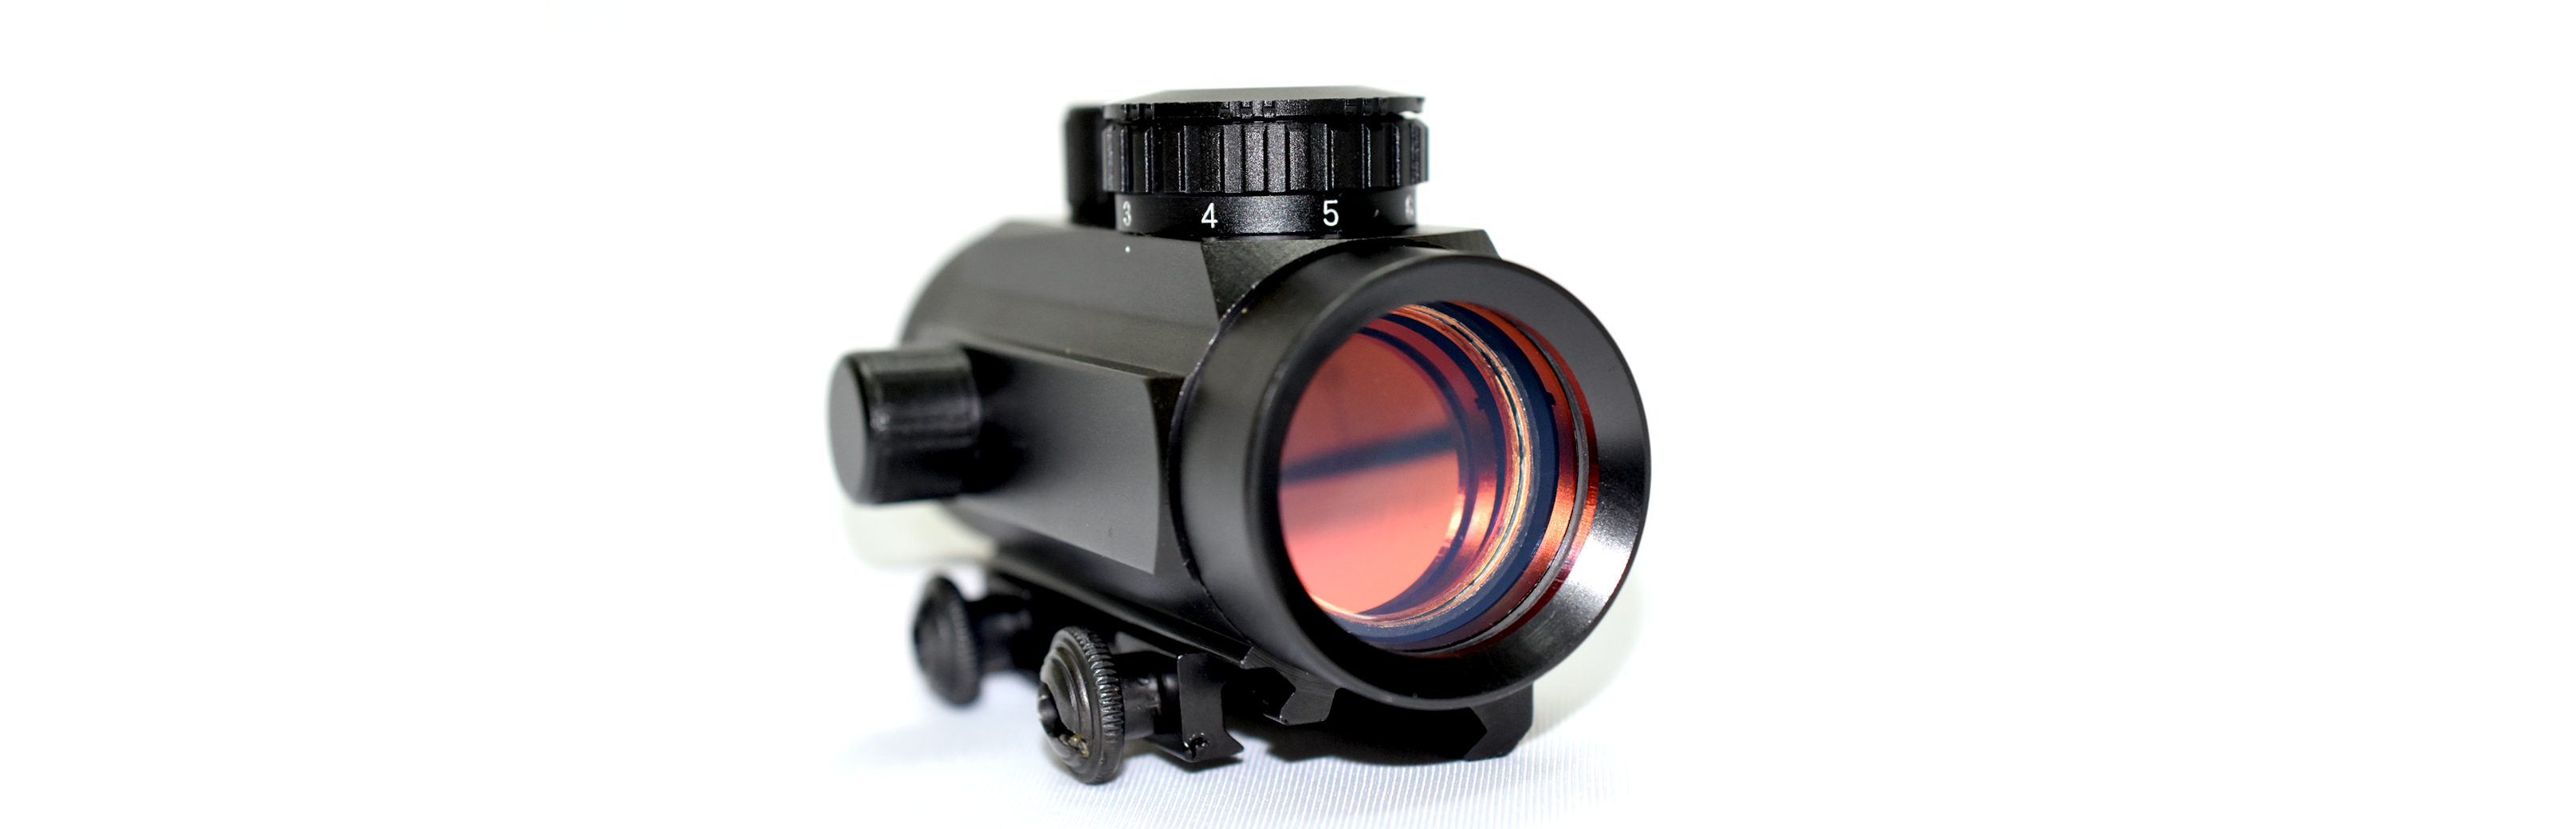 /archive/product/item/images/RedDotSightScope/Red-Dot-Sight-Scope-1.png